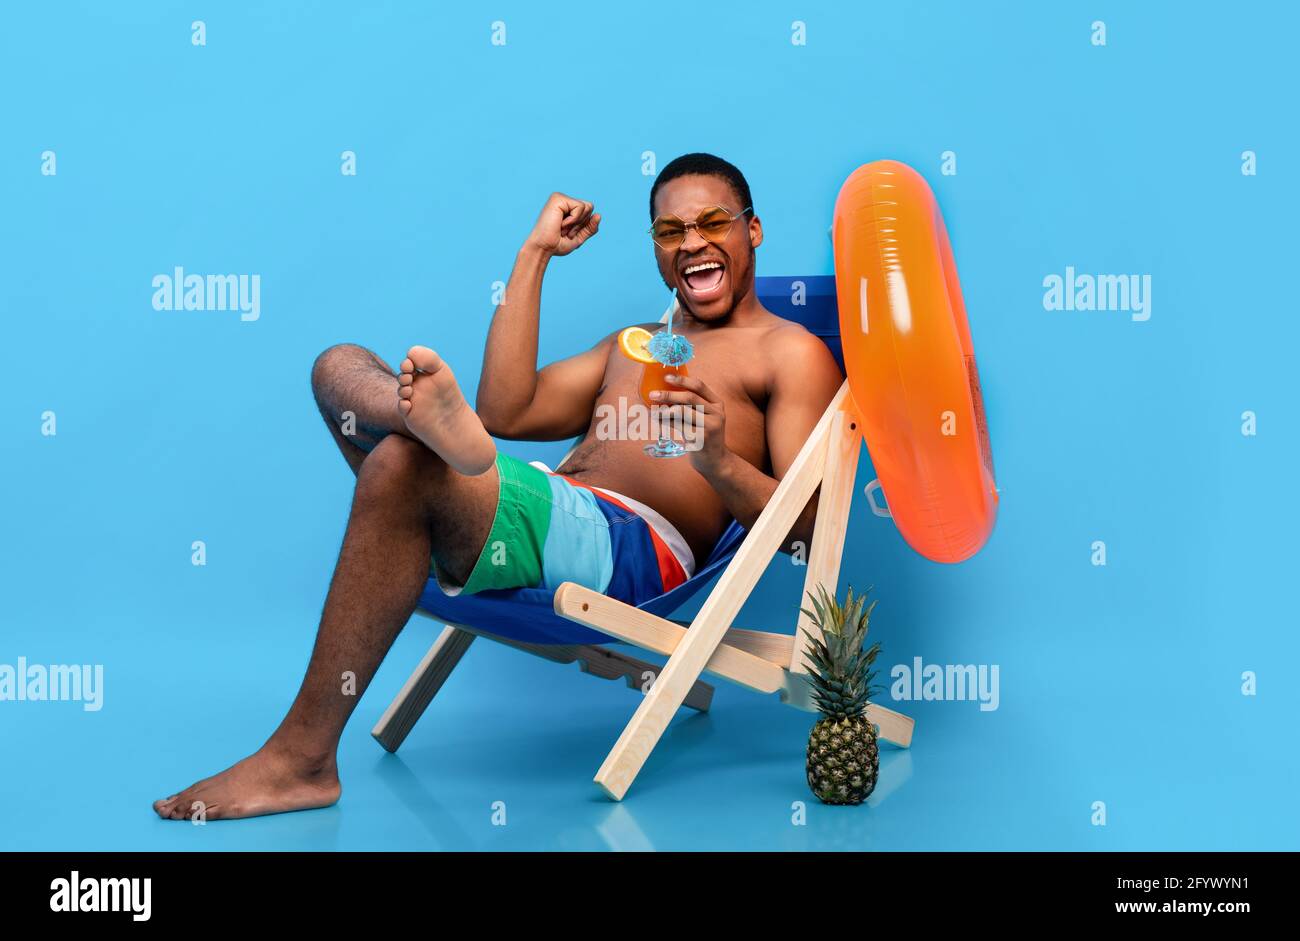 Full length of excited black man drinking tropical cocktail in lounge chair, gesturing YES over blue background Stock Photo